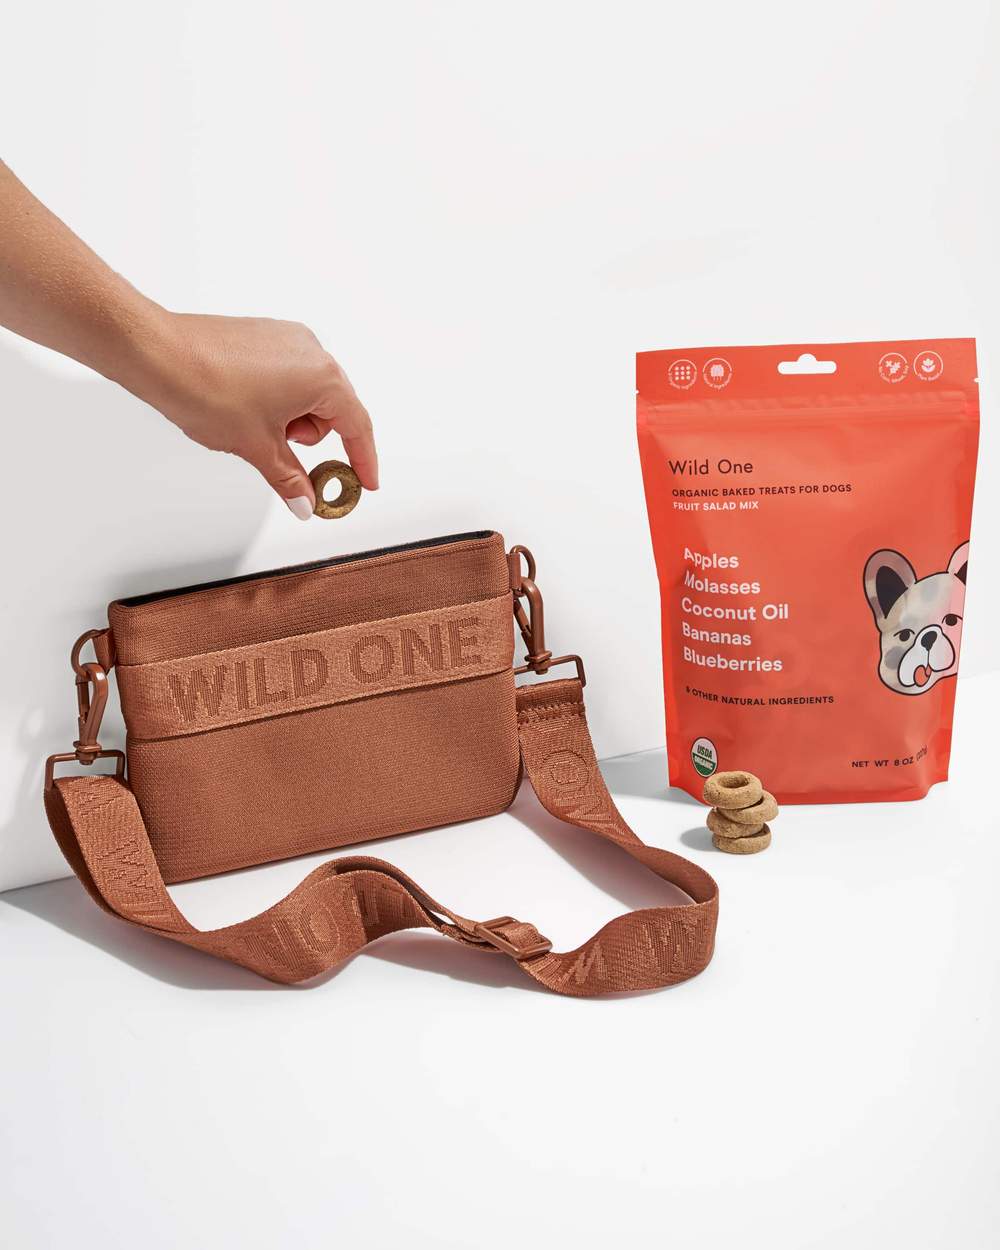 treat pouch for dog owners